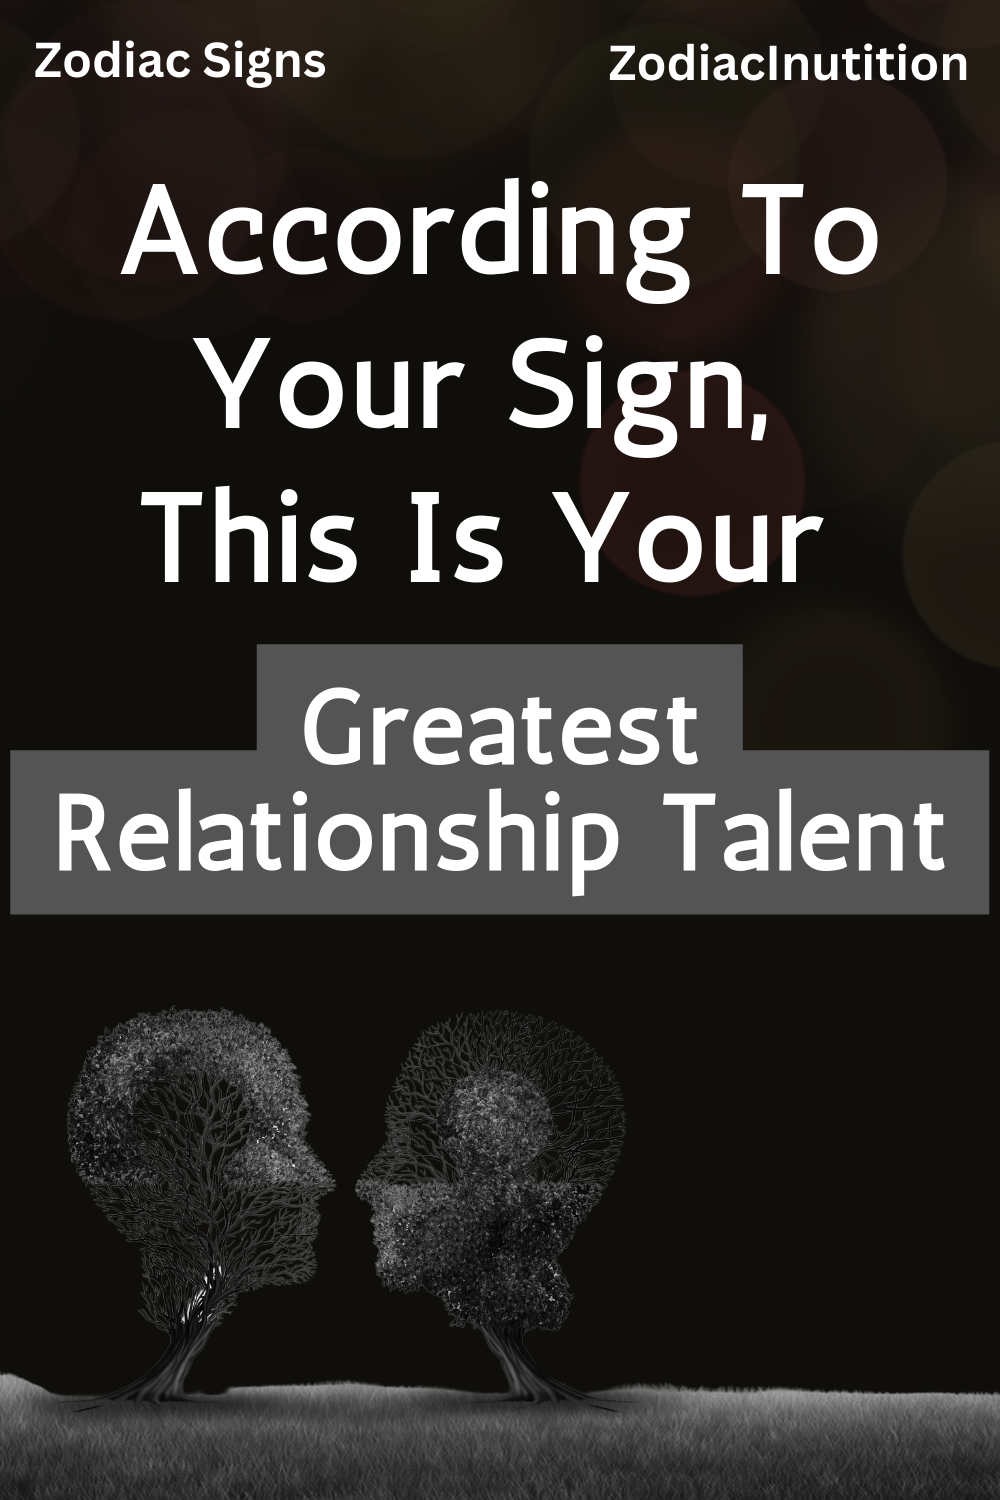 According To Your Sign, This Is Your Greatest Relationship Talent